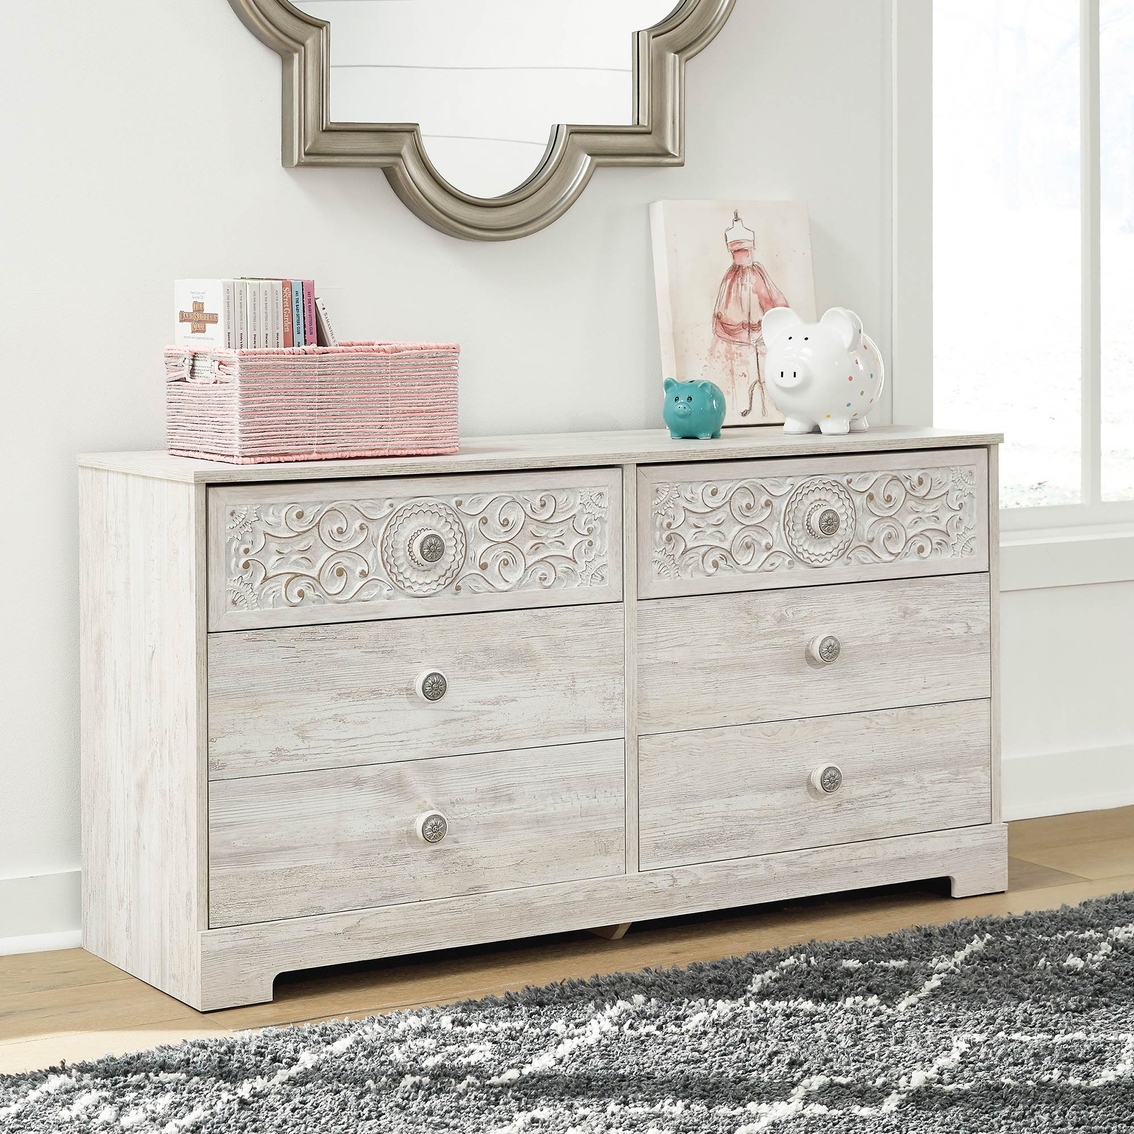 Signature Design by Ashley Paxberry Dresser - Image 2 of 7